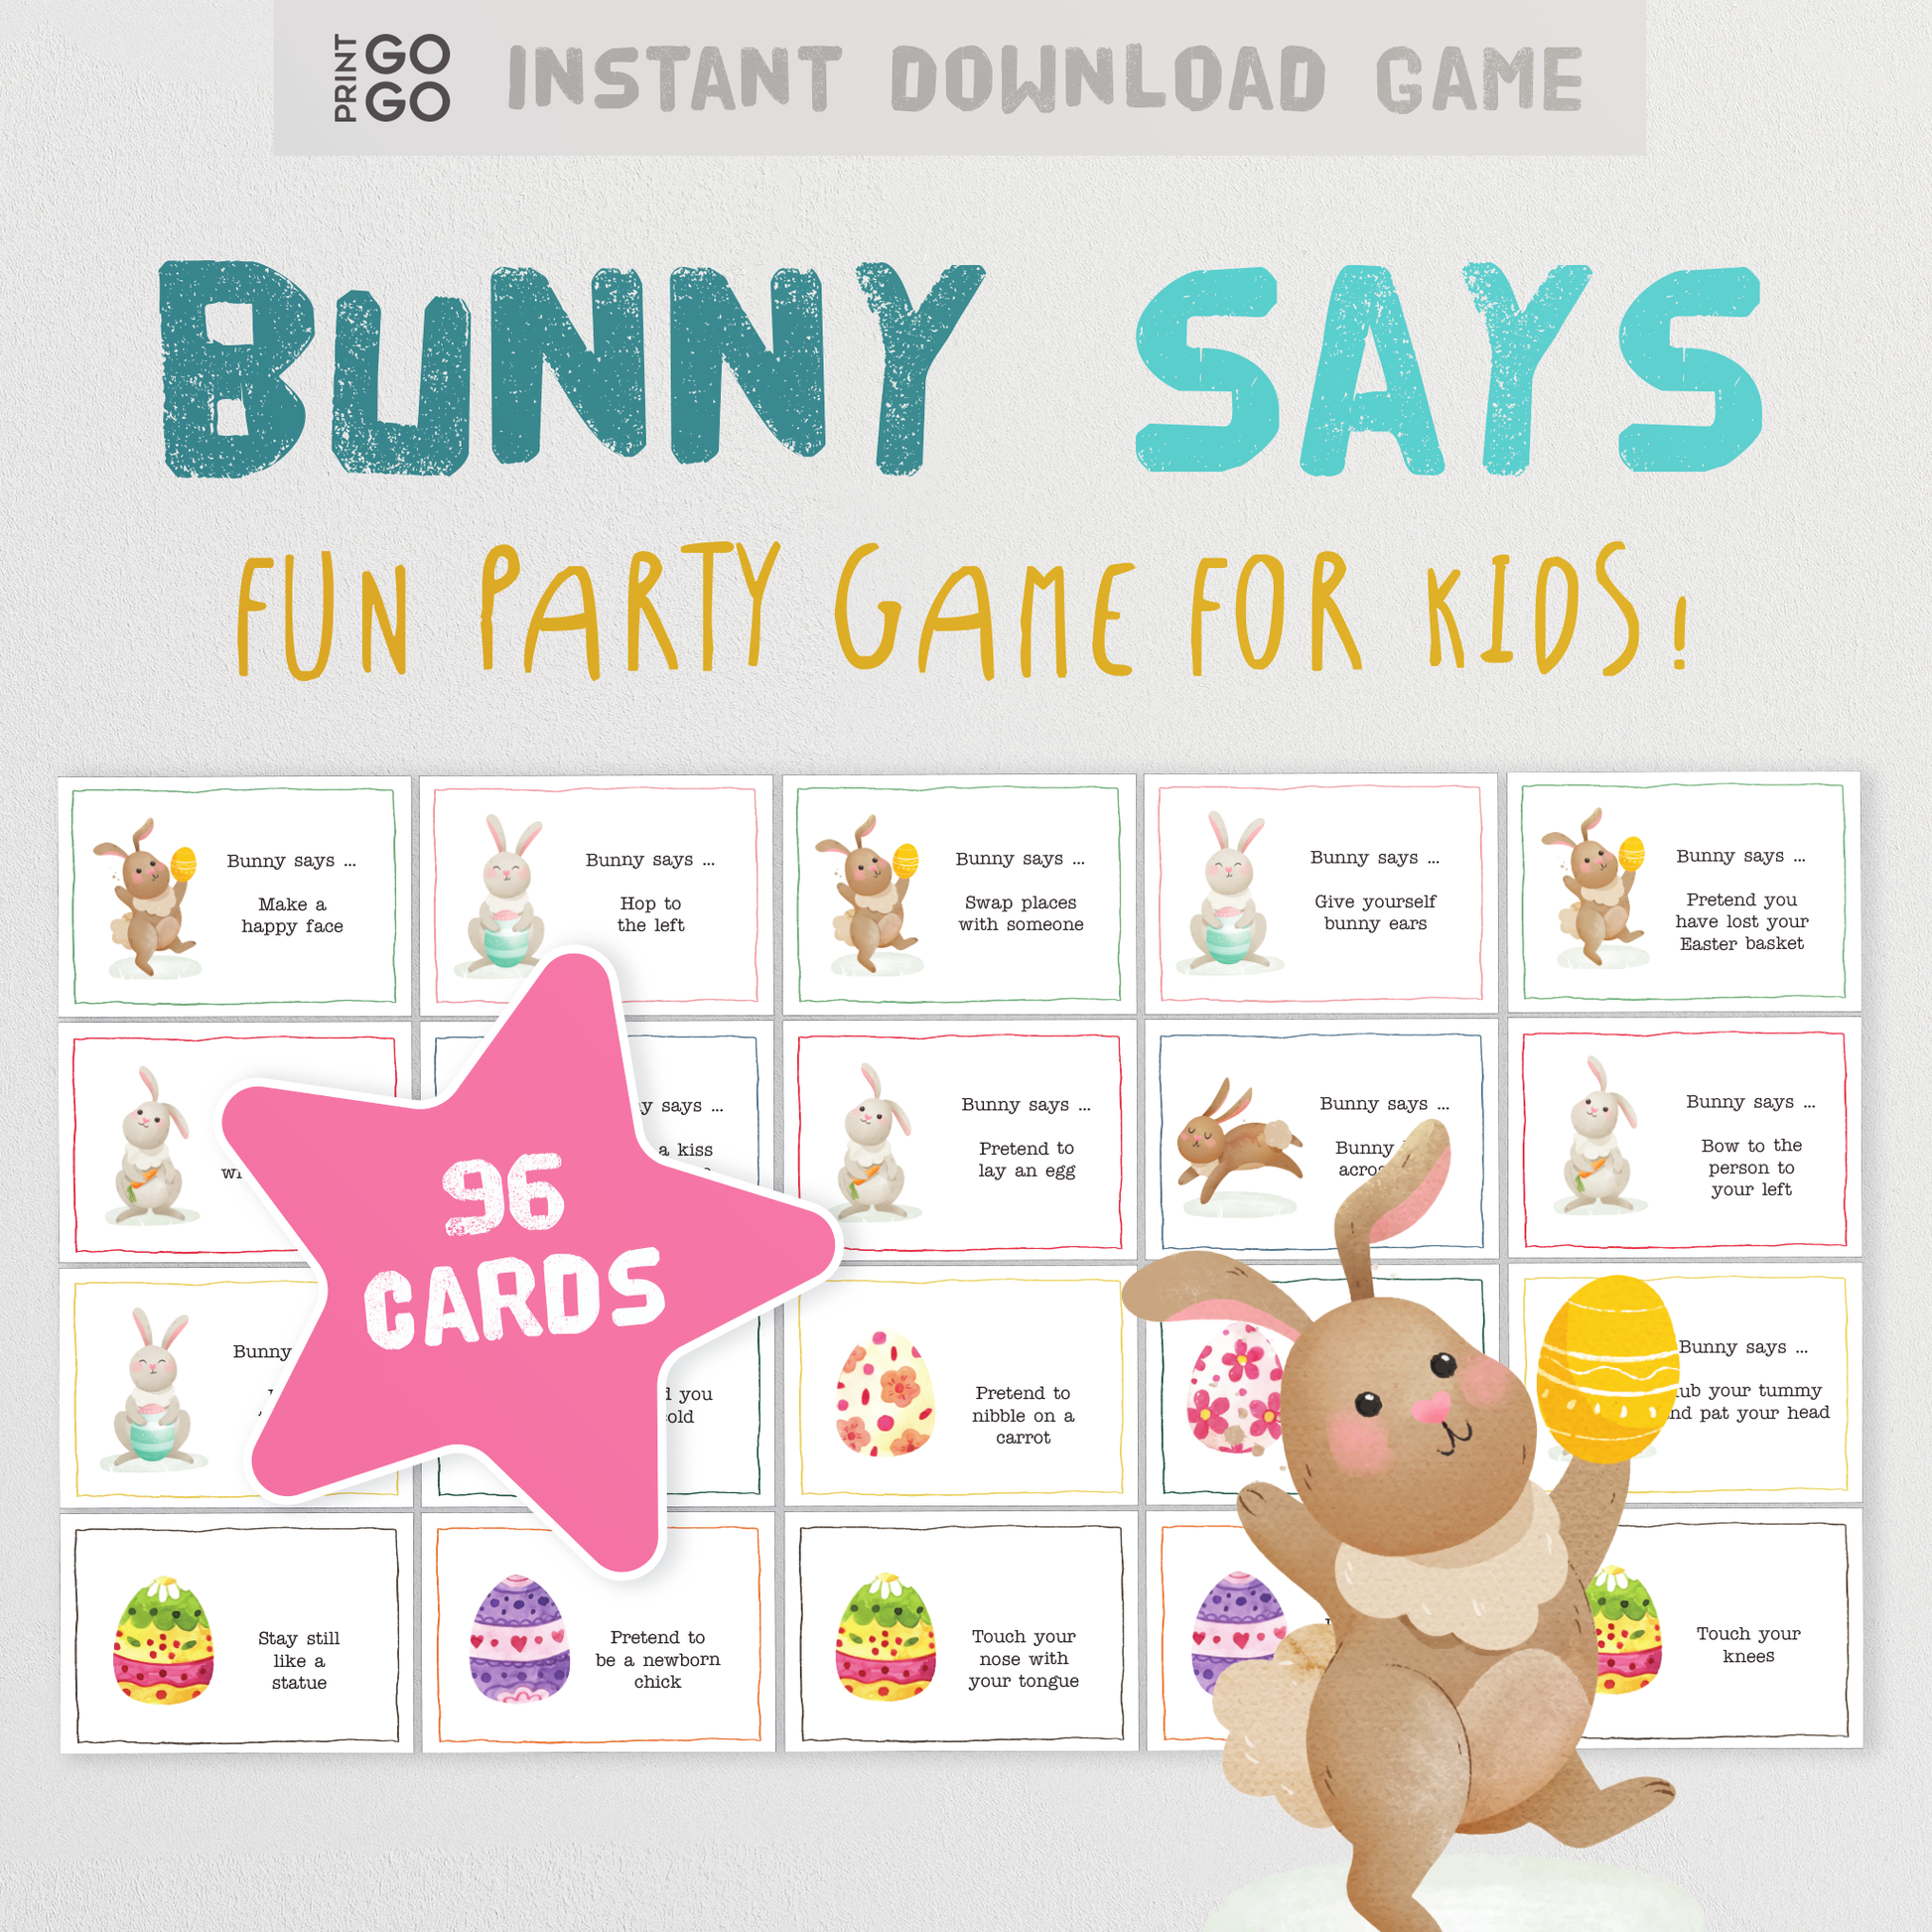 Bunny Says - The Fun Easter Party Game for Kids!